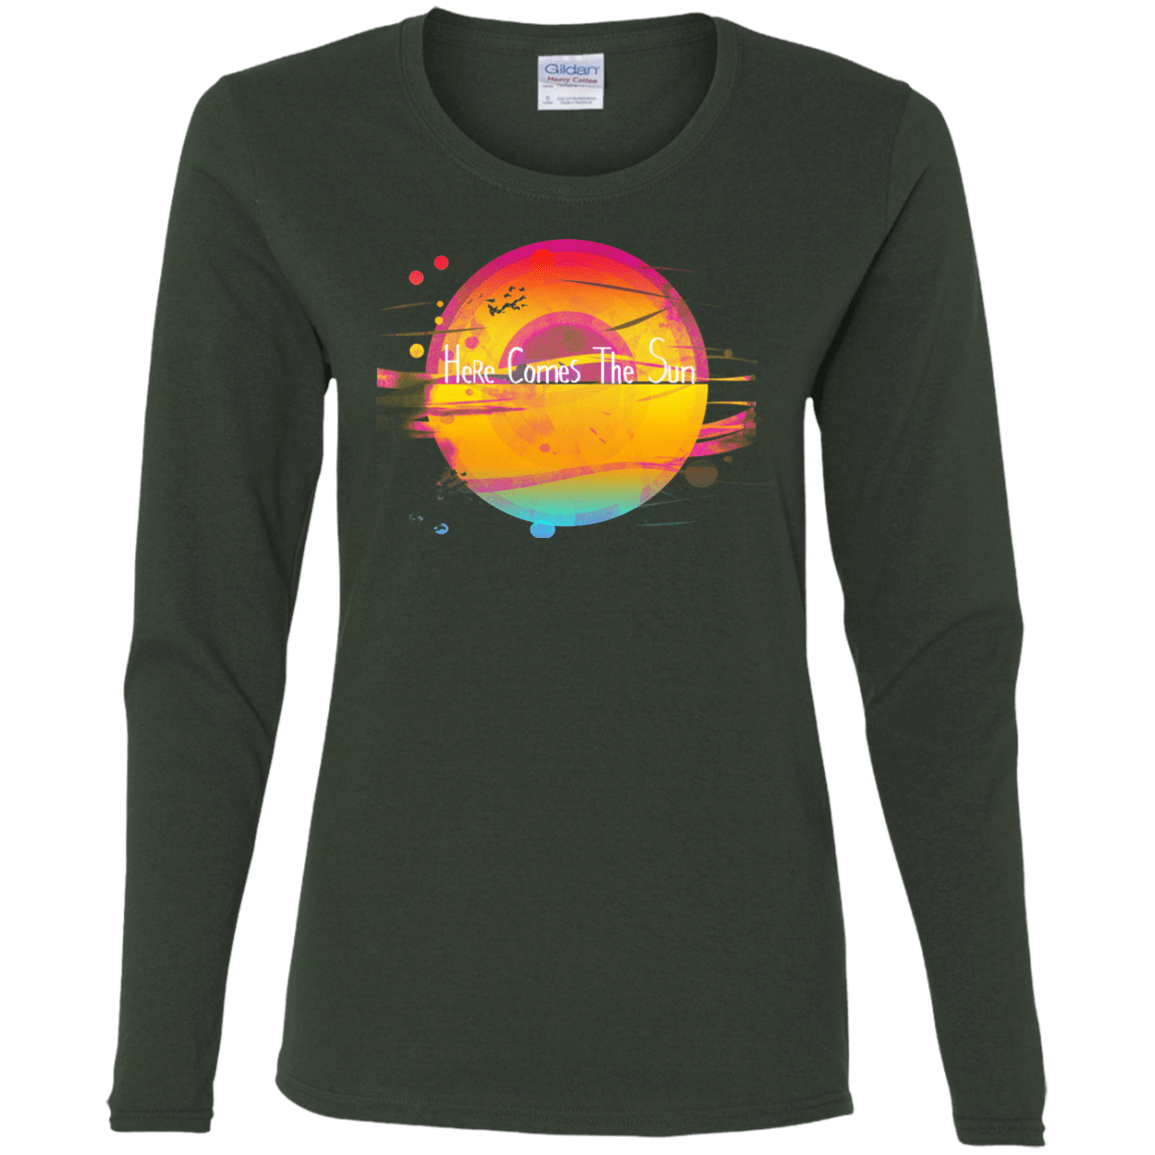 T-Shirts Forest / S Here Comes The Sun (2) Women's Long Sleeve T-Shirt